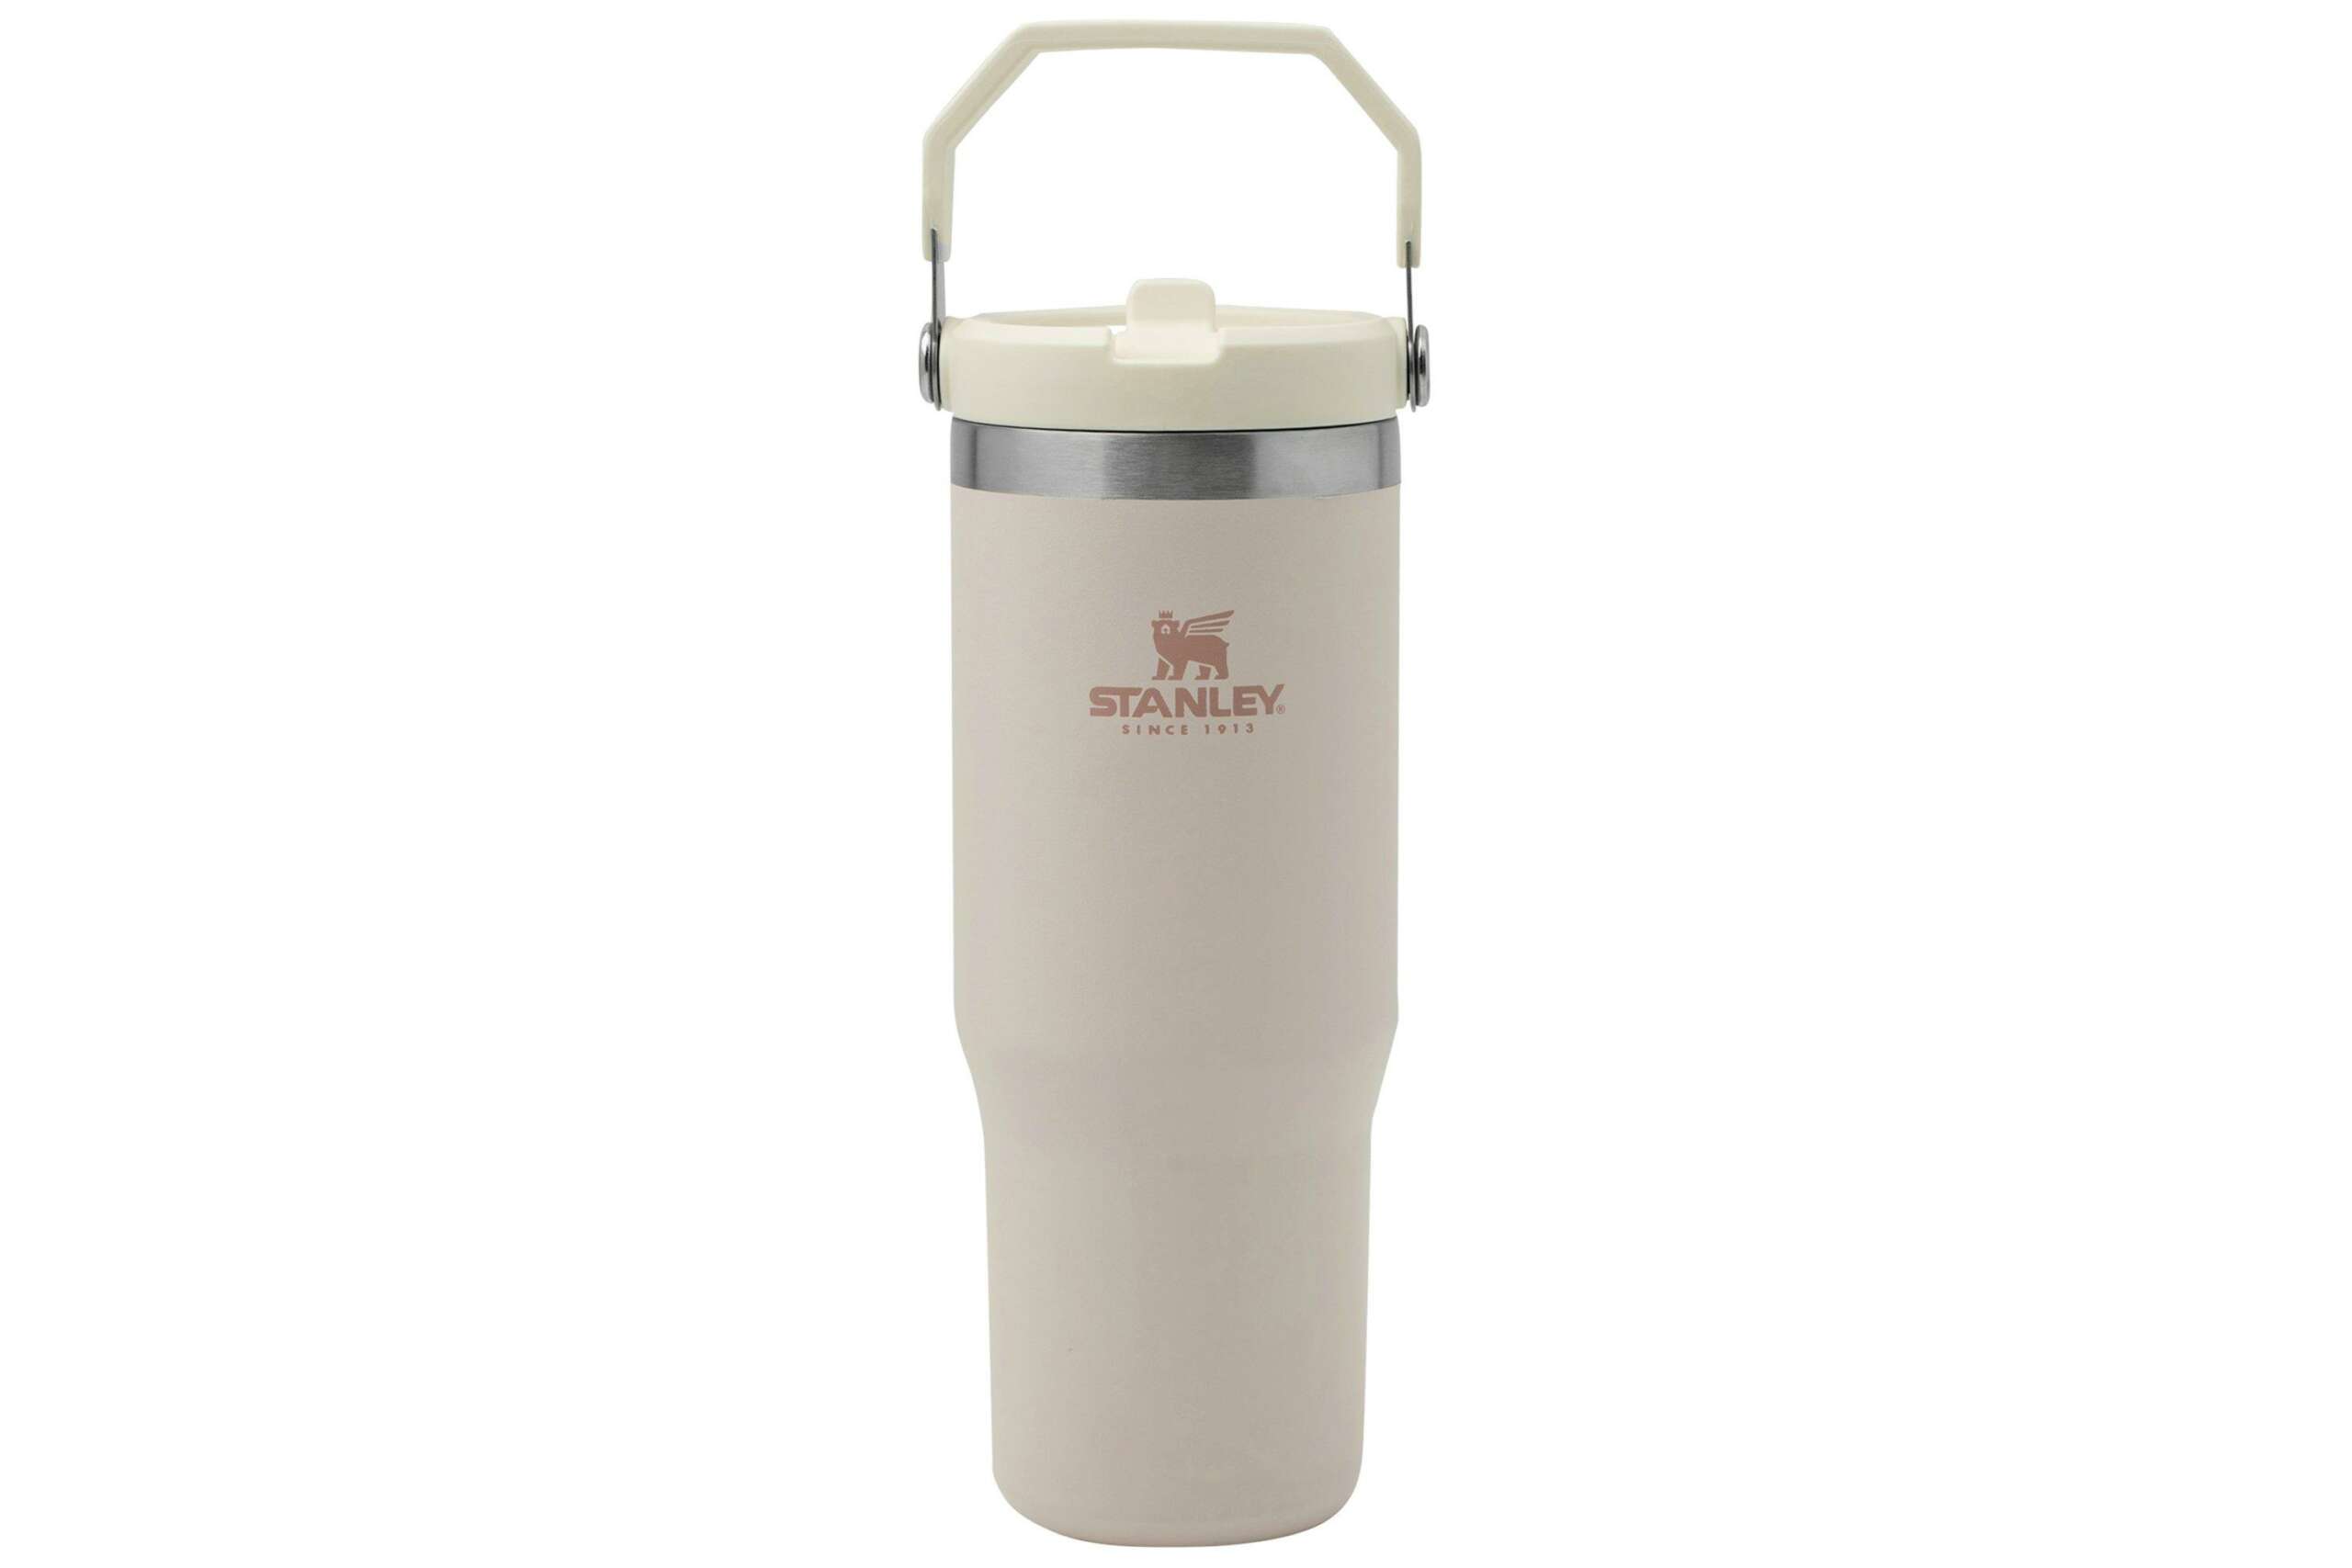 Tumbler Charm Set: Stanley Cup-Inspired Accessories for Your Water Bottle  Price in Pakistan 